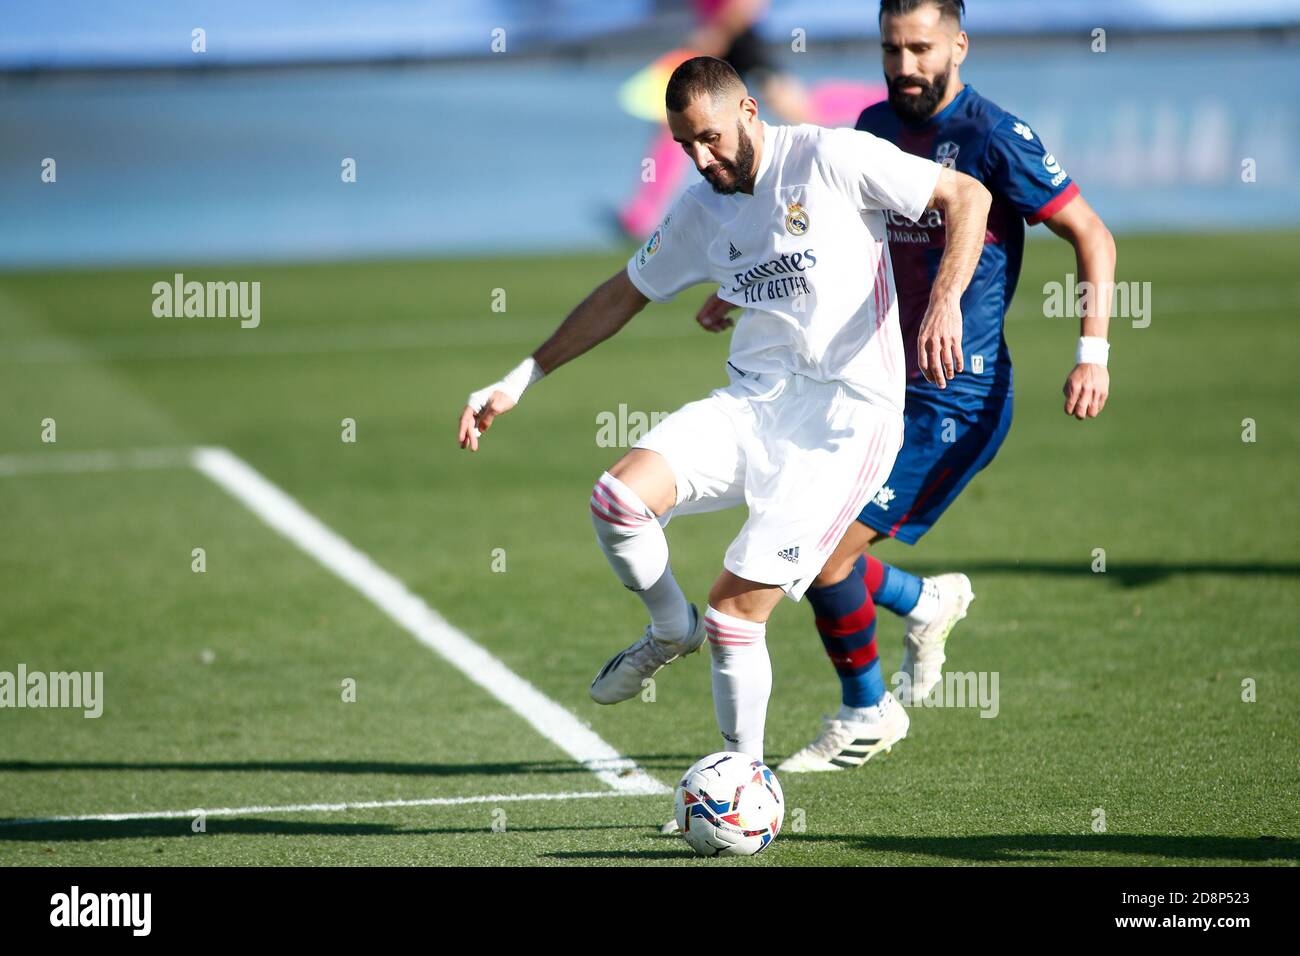 Madrid, Spain. 31st October, 2020. Karim Benzema of Real Madrid in action during the Spanish championship La Liga football match between Real Madrid and SD Huesca on October 31, 2020 at Alfredo Di Stefano stadium in Valdebebas, Madrid, Spain - Photo Oscar J Barroso / Spain DPPI / DPPI Credit: LM/DPPI/Oscar Barroso/Alamy Live News Stock Photo